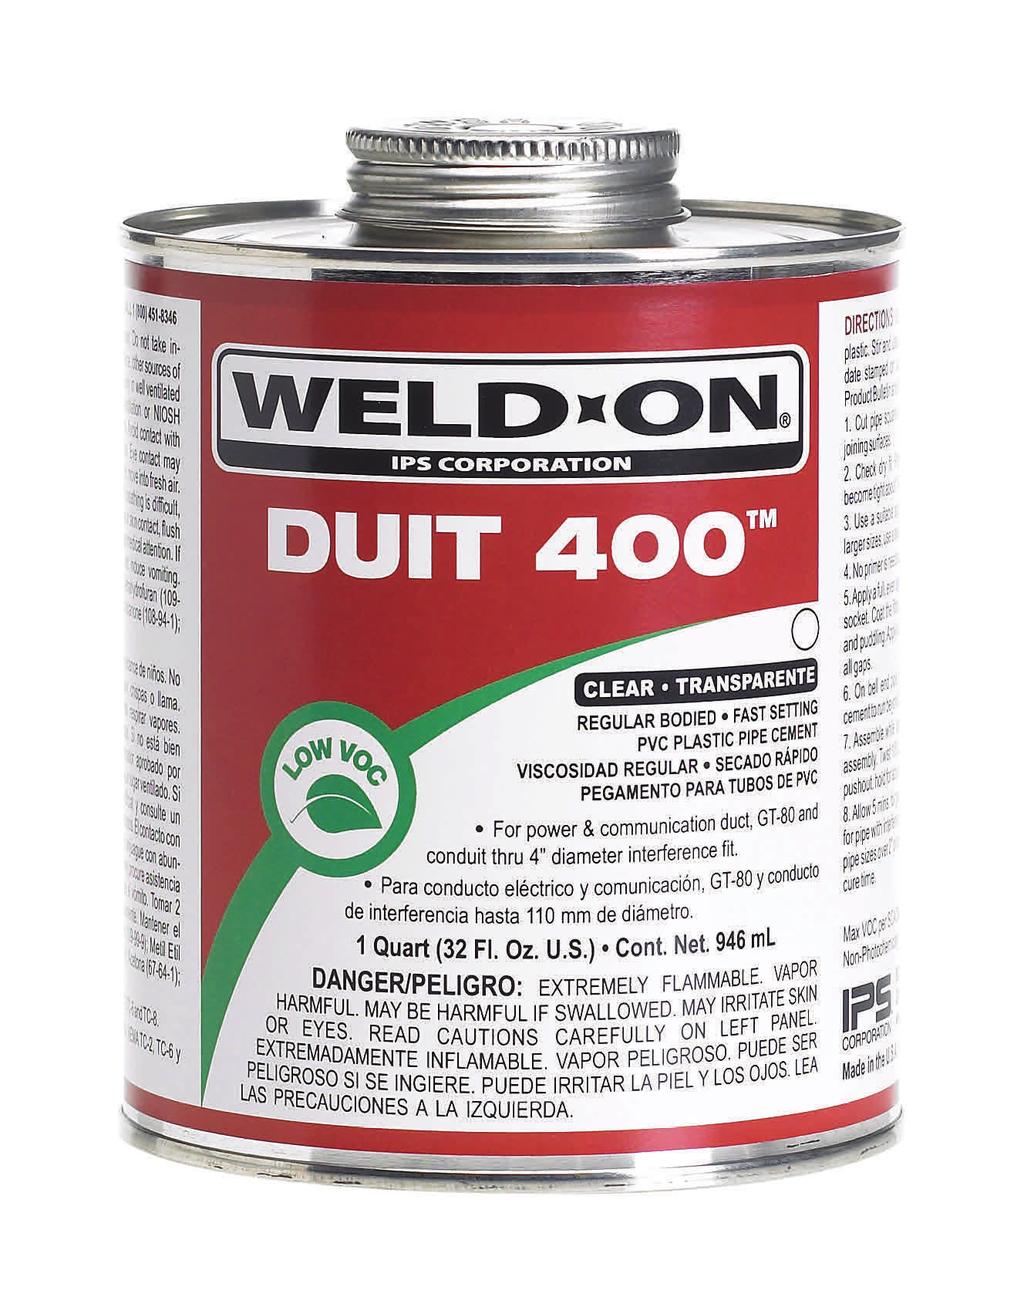 DUIT 400 LOW VOC PVC SOLVENT CEMENTS Regular bodied Fast setting Very high strength For PVC electrical duct and conduit interference fit through 8 inch (200 mm) diameter Can be used with or without